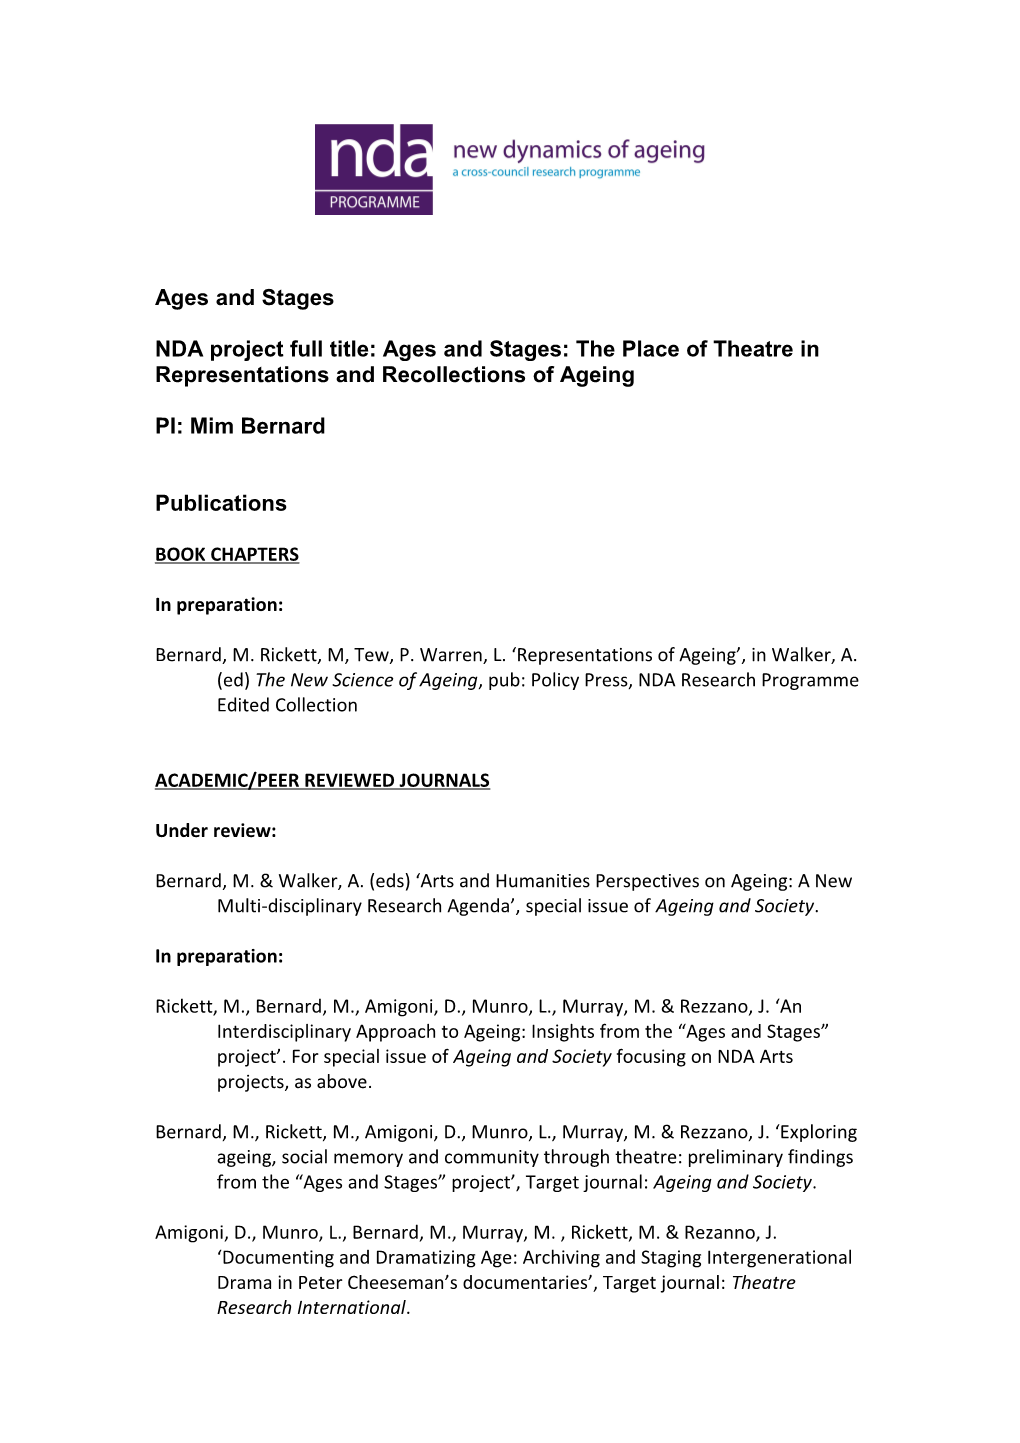 NDA Project Full Title: Ages and Stages: the Place of Theatre in Representations And